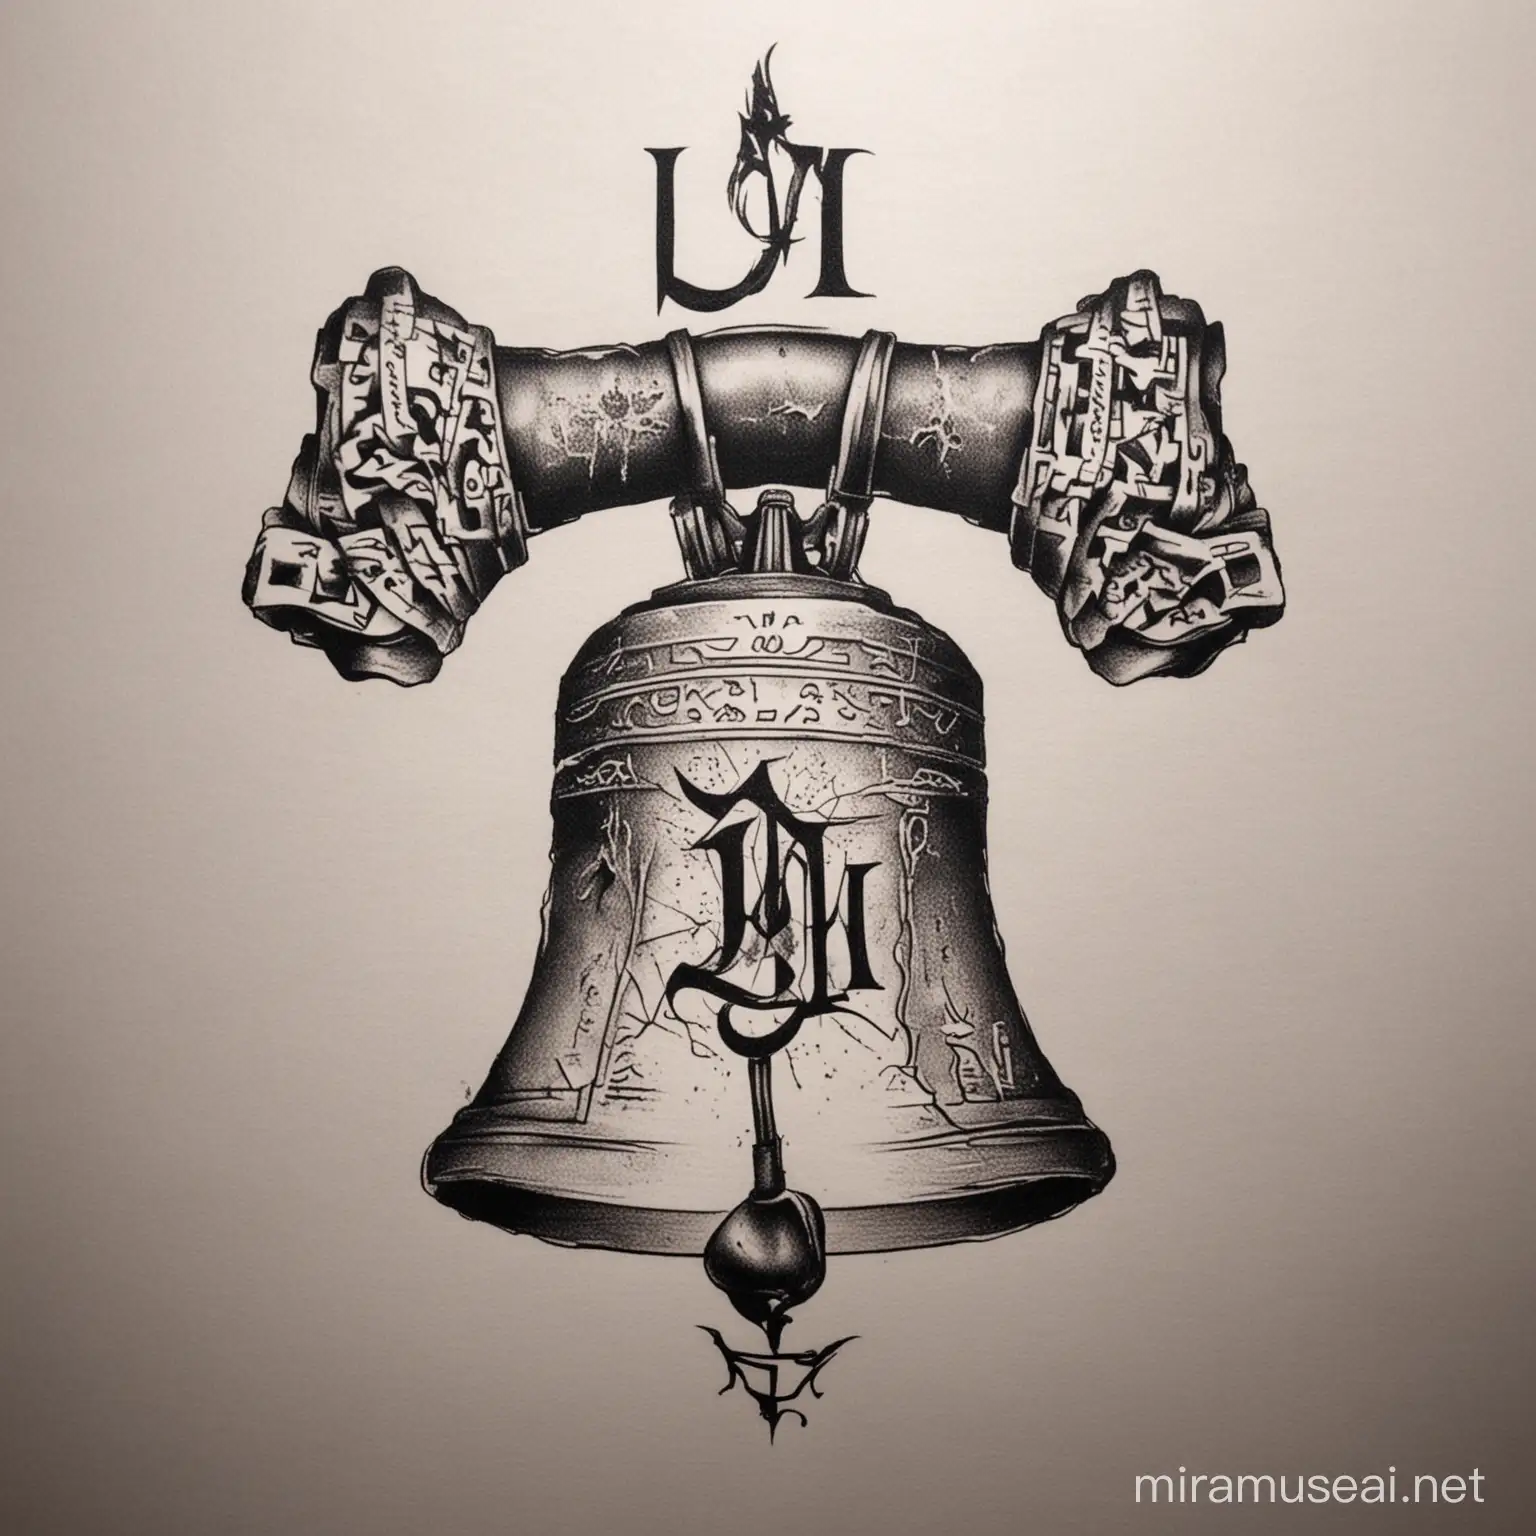 Tribal Tattoo Design Cracked Liberty Bell with Hidden Letters